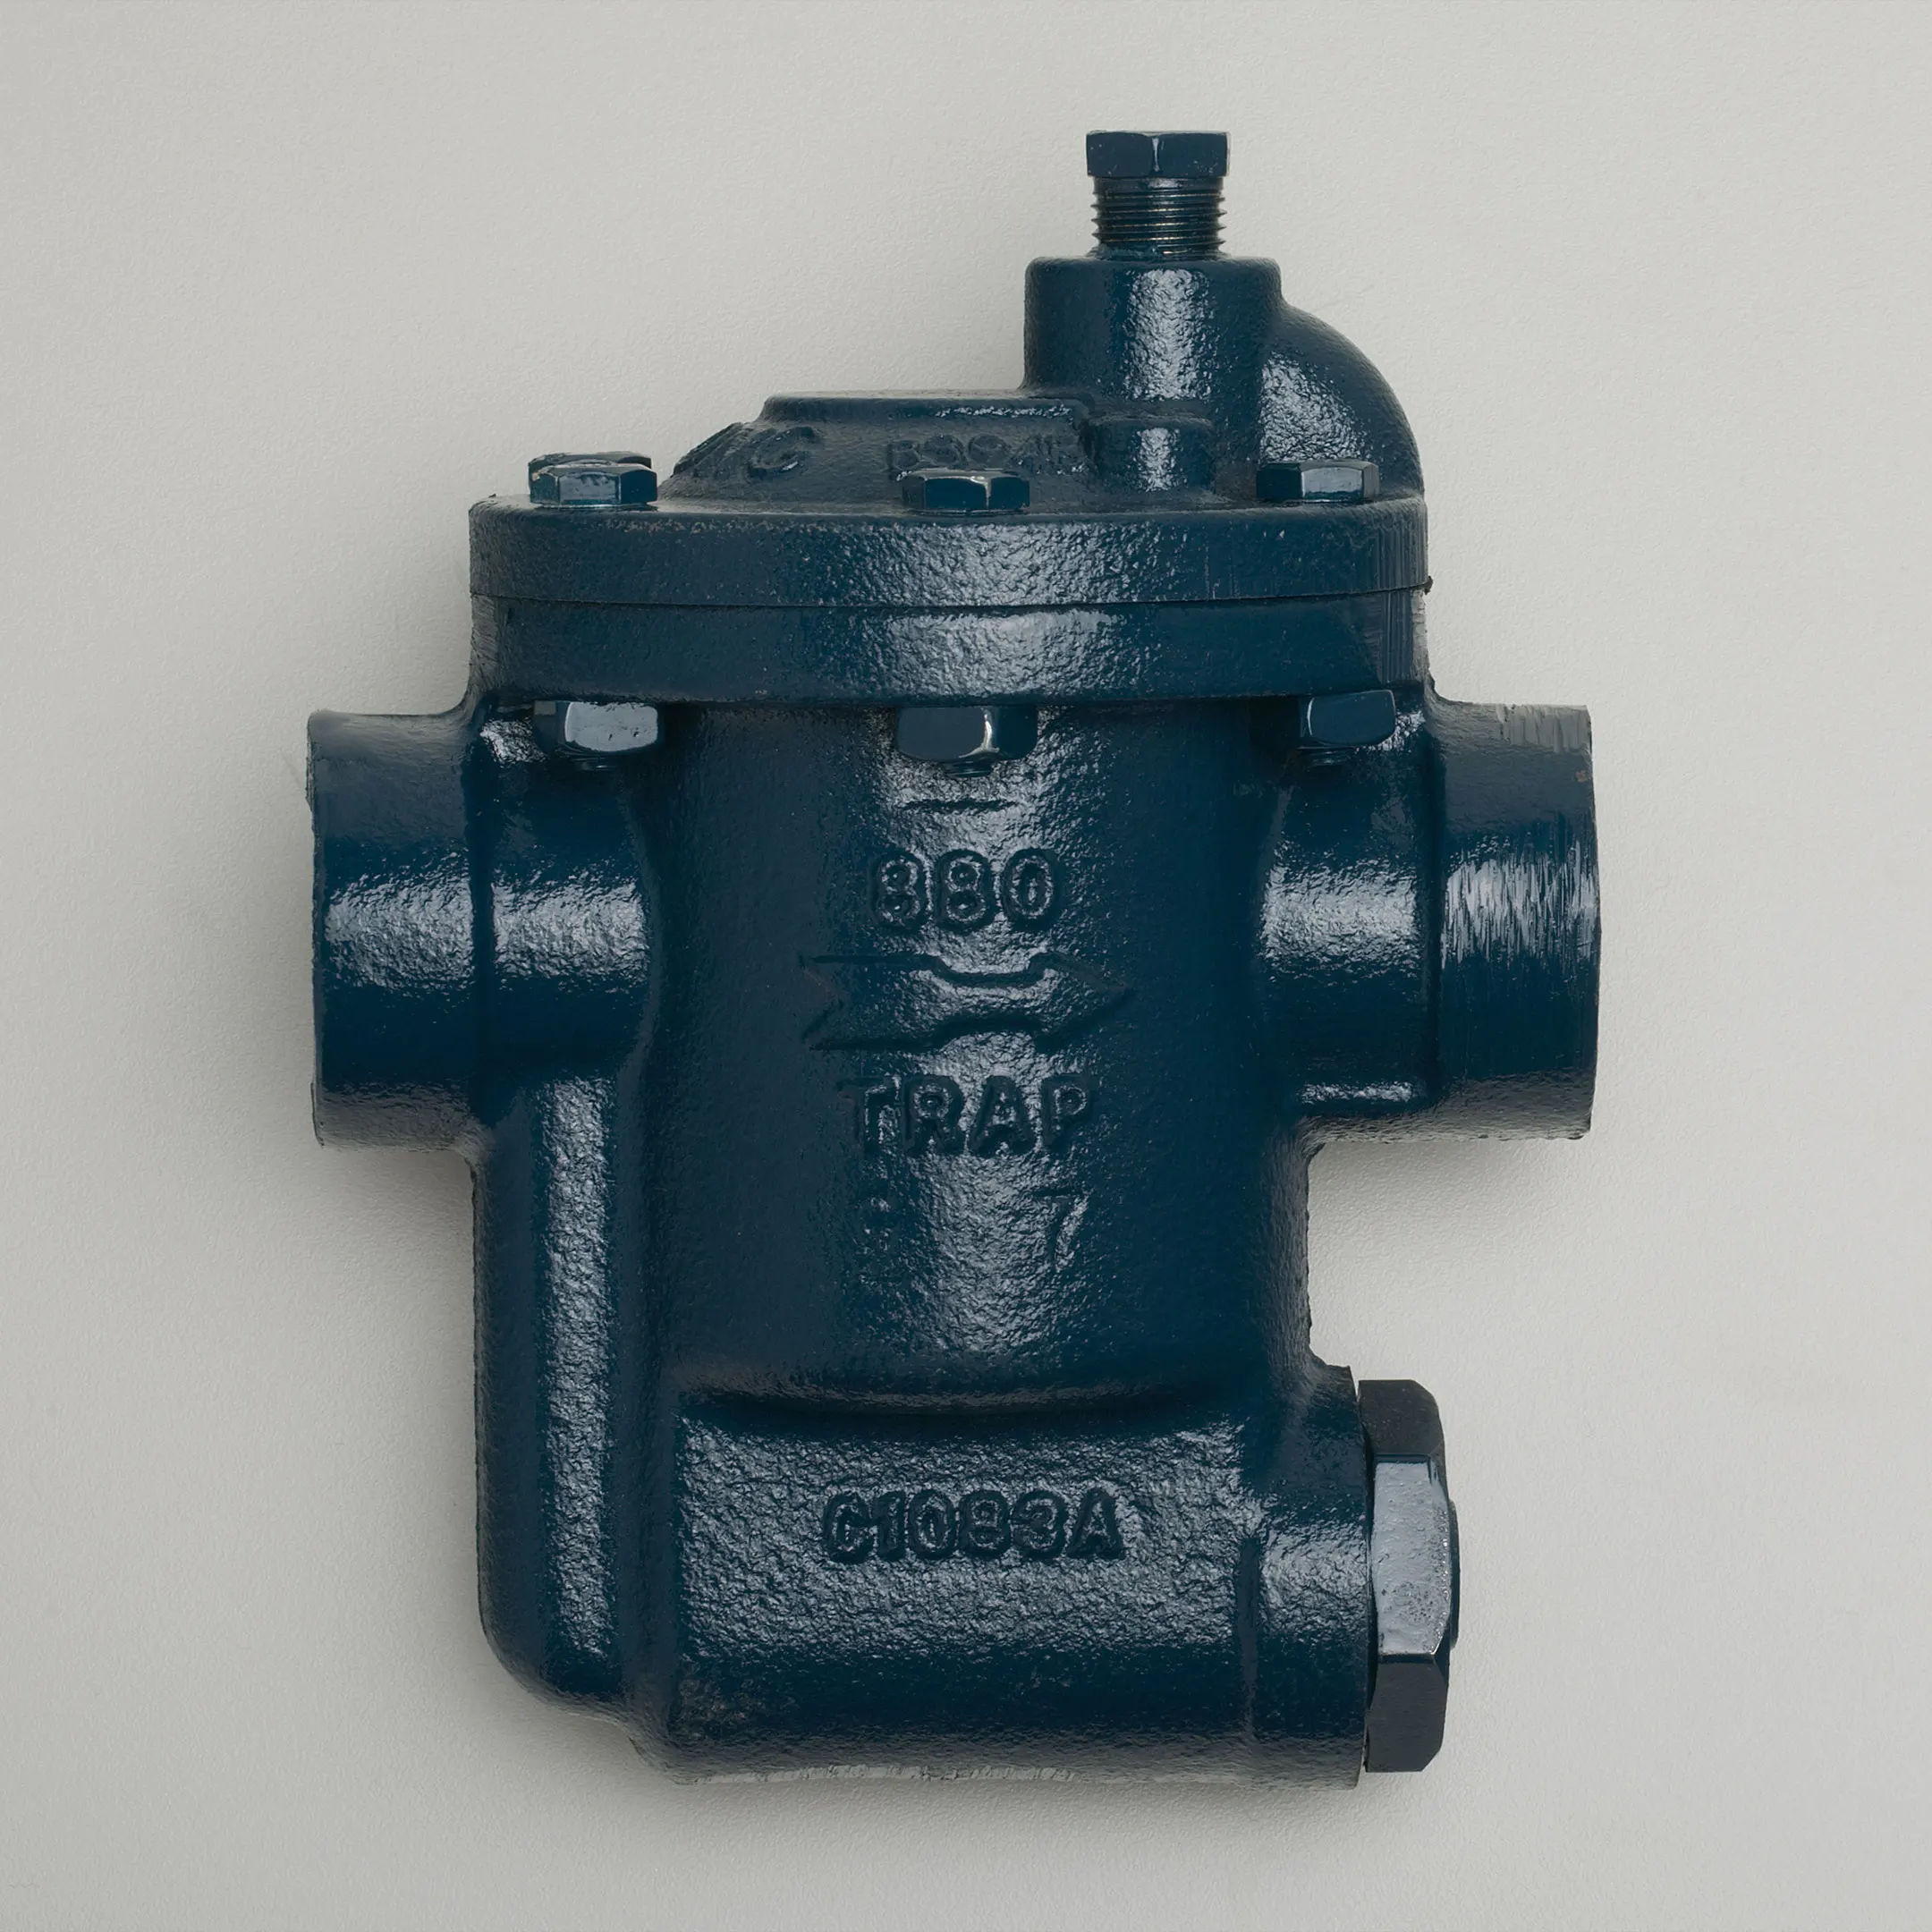 Armstrong steam trap фото 17